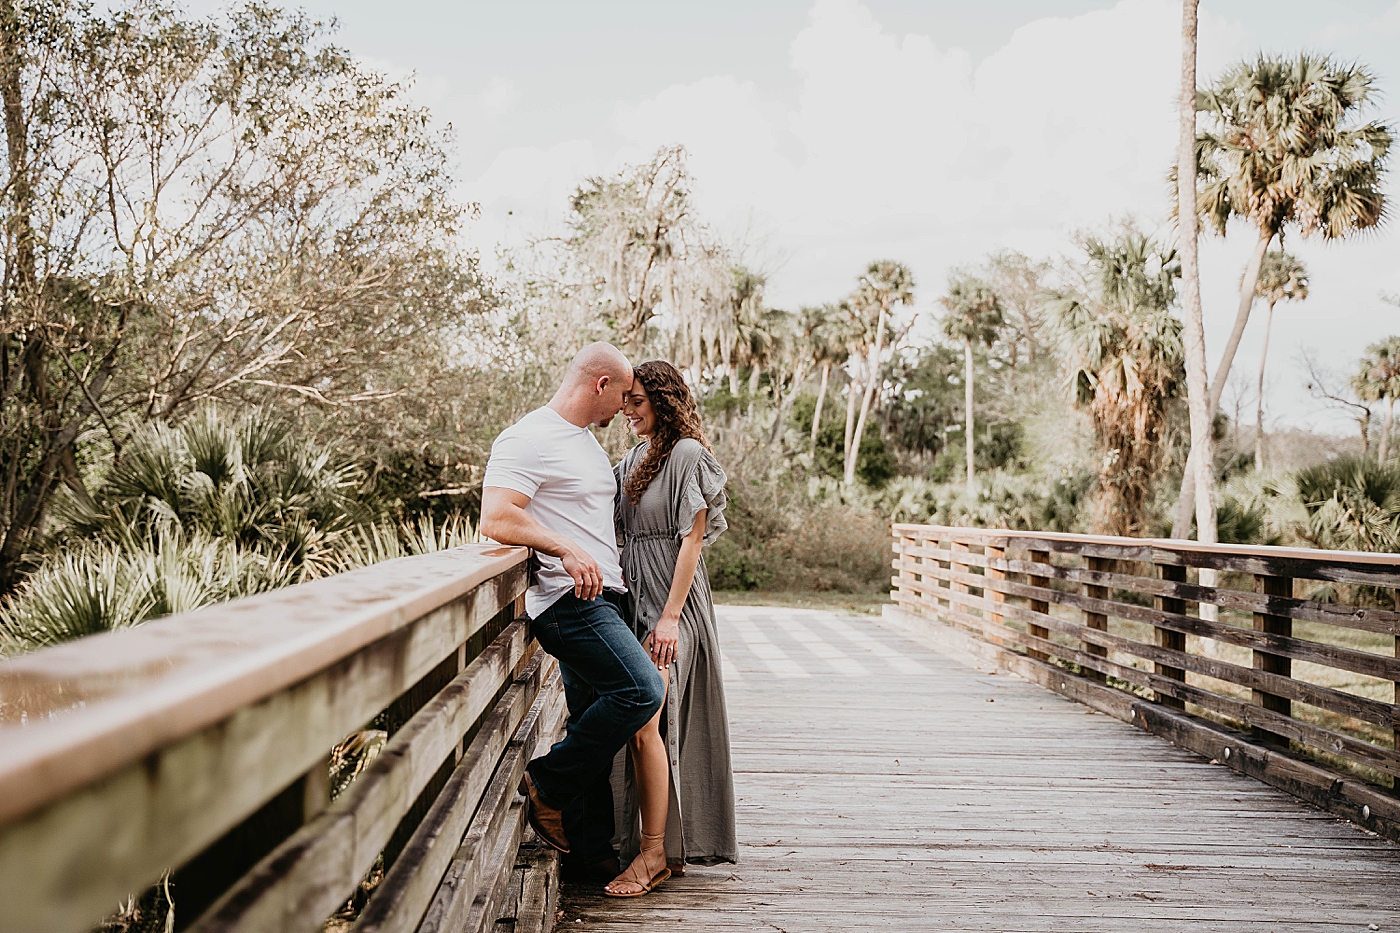 Couple nuzzling on side of wooden bridge Romantic Riverbend Park Engagement Photography captured by South Florida Photographer Krystal Capone Photography